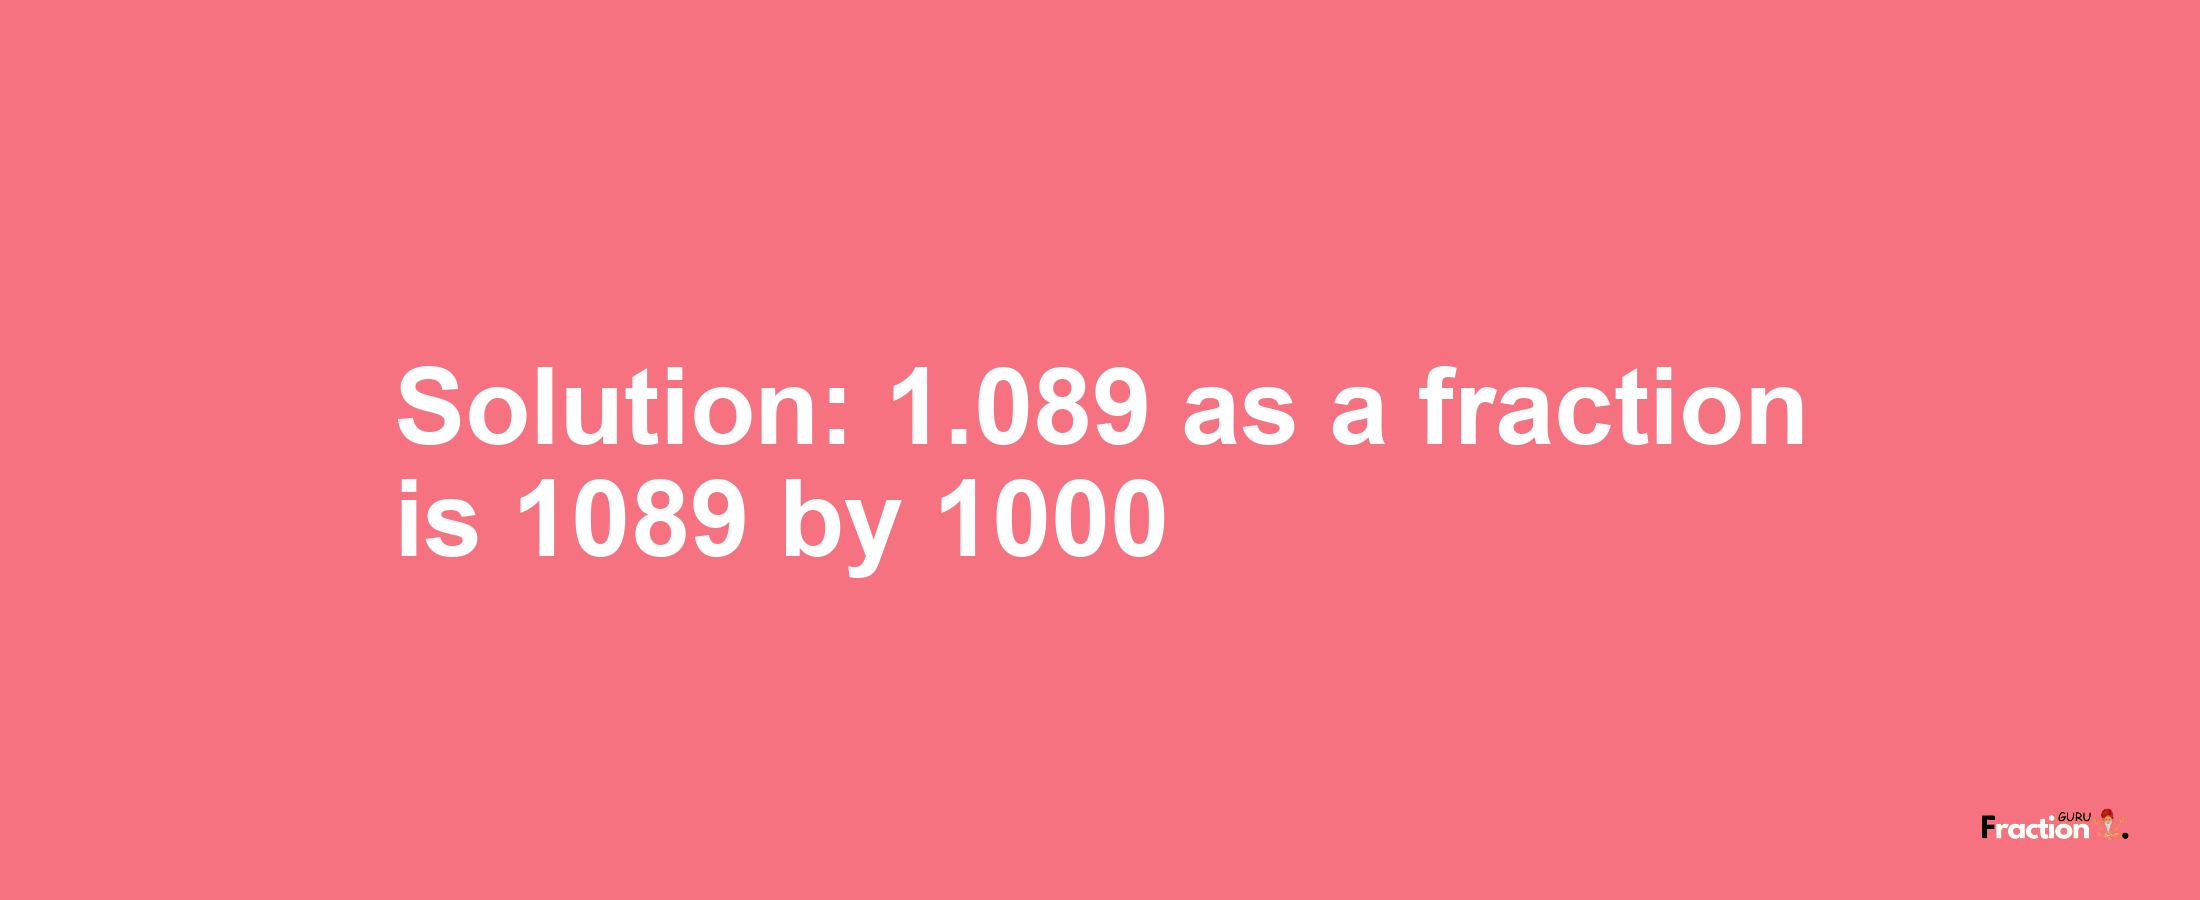 Solution:1.089 as a fraction is 1089/1000